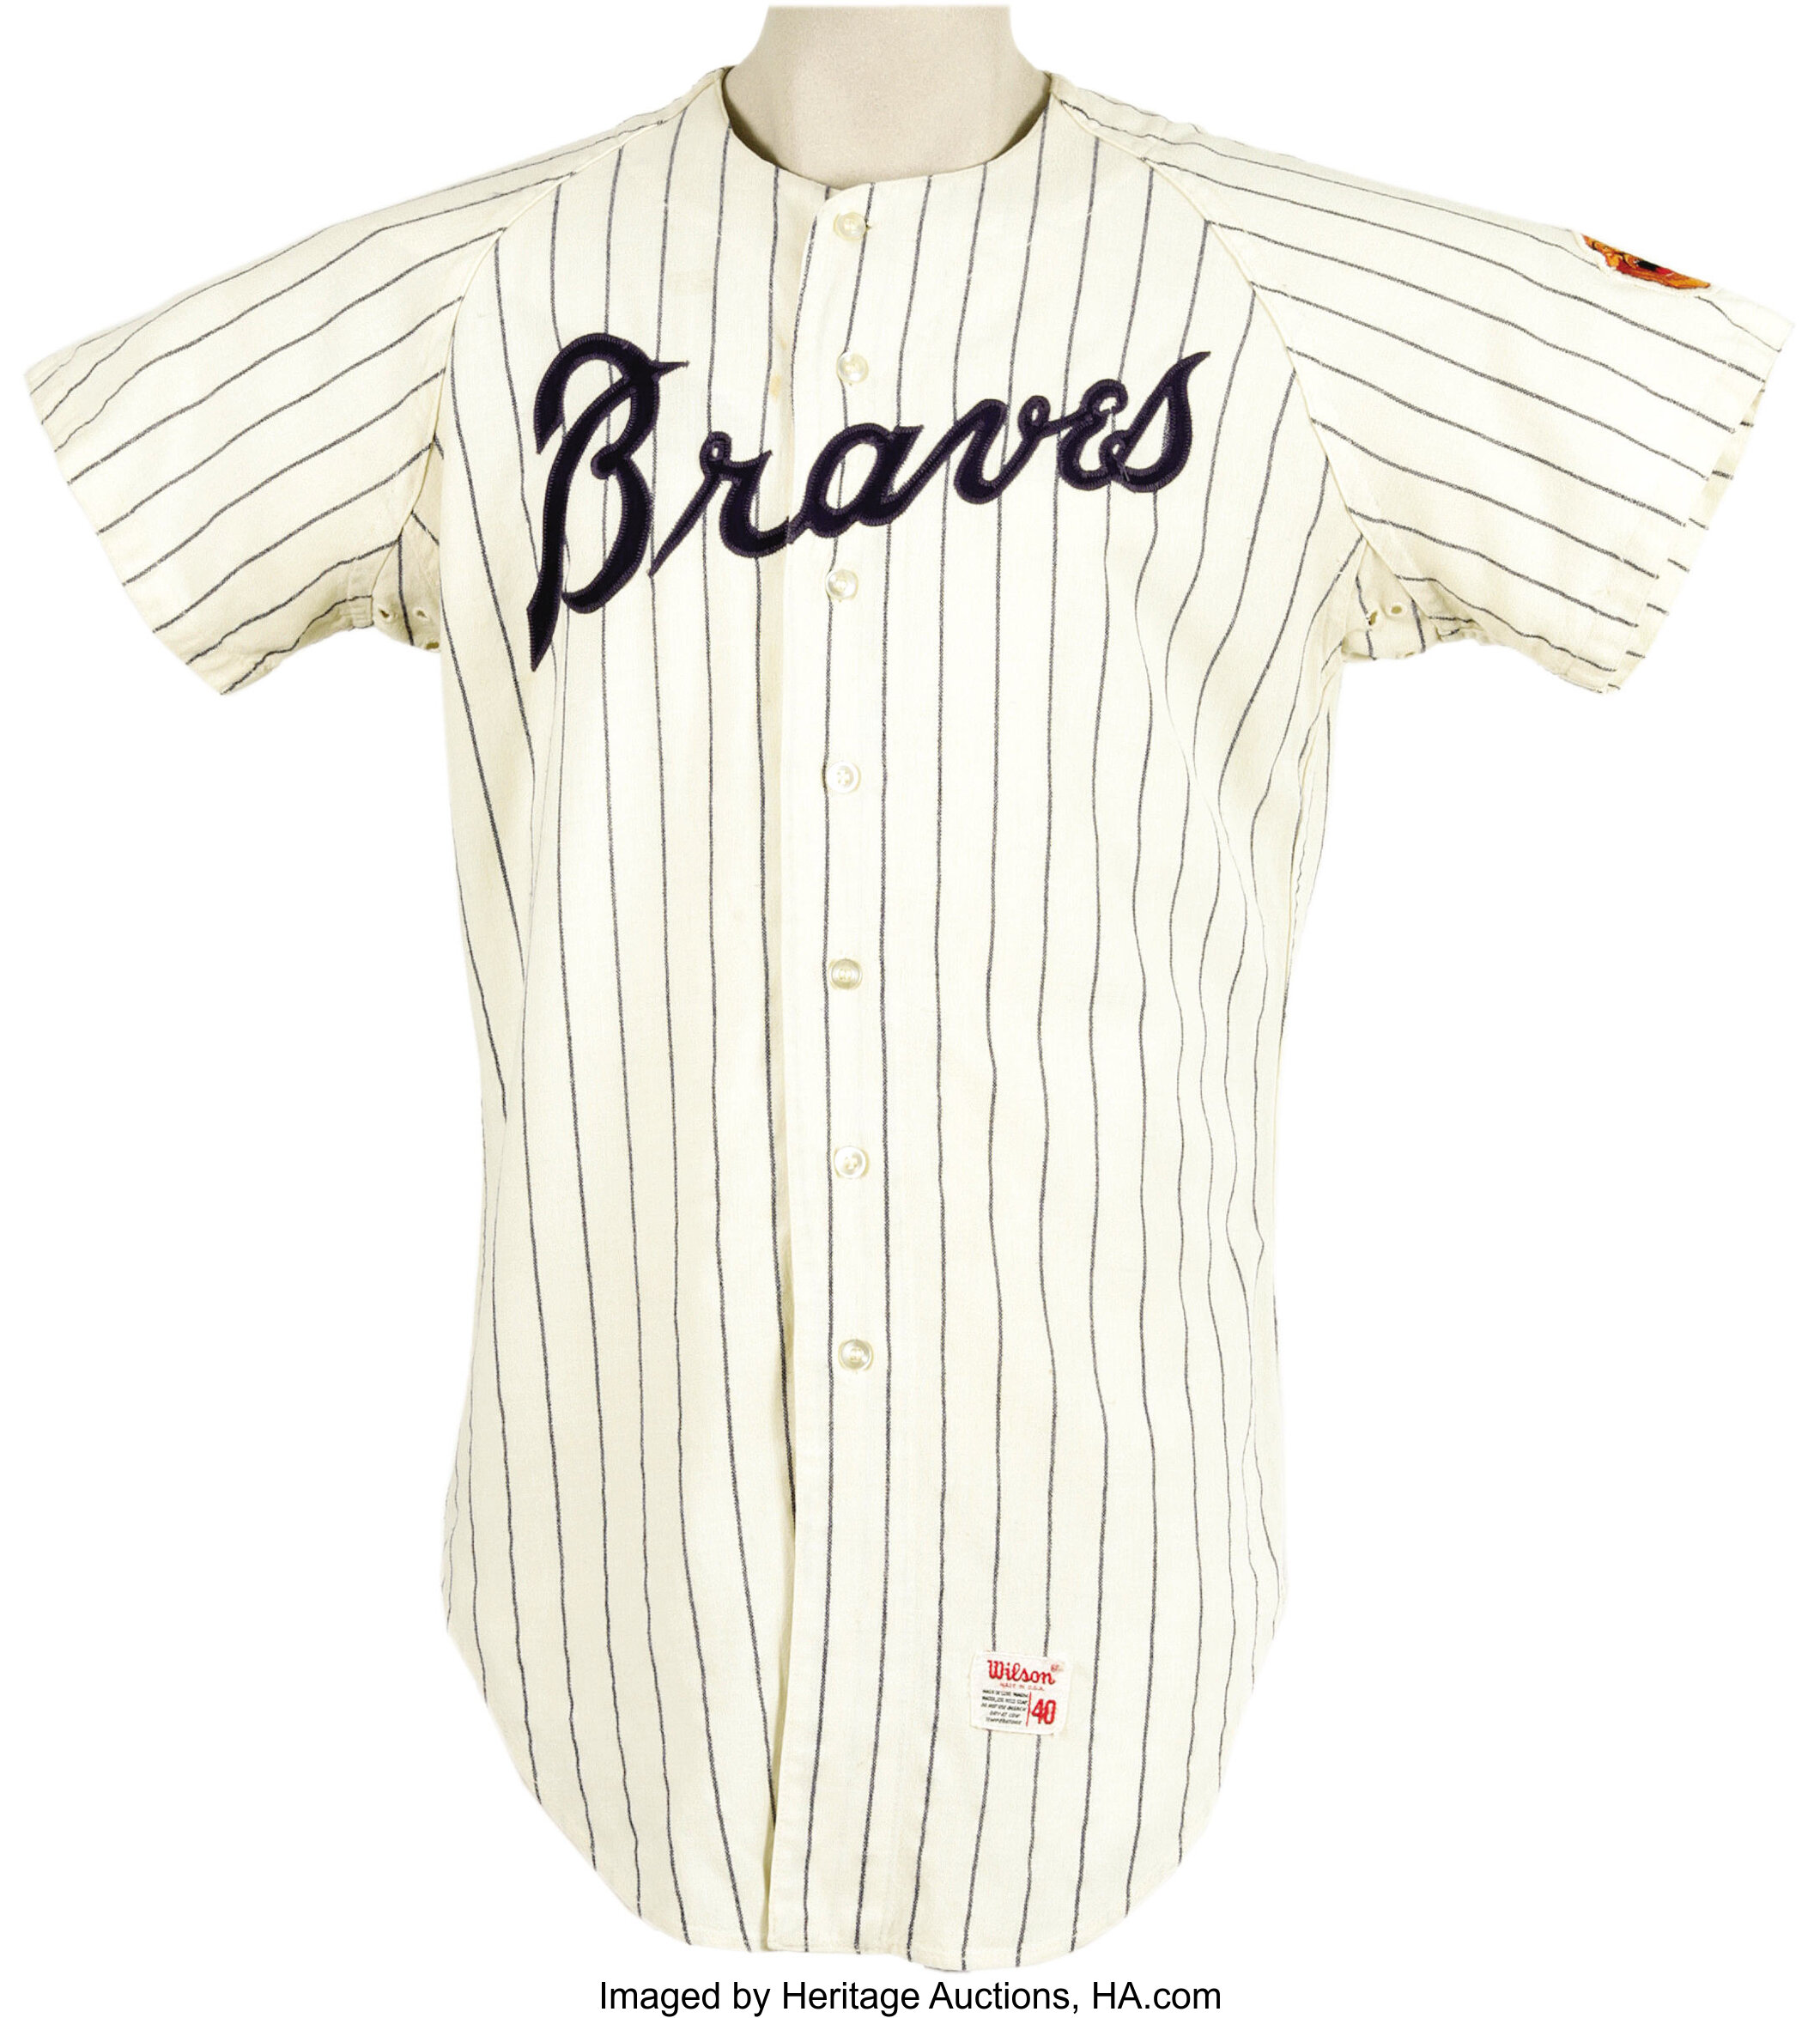 1968 Dusty Baker Game Worn Rookie Jersey. Home white pinstriped, Lot  #19646